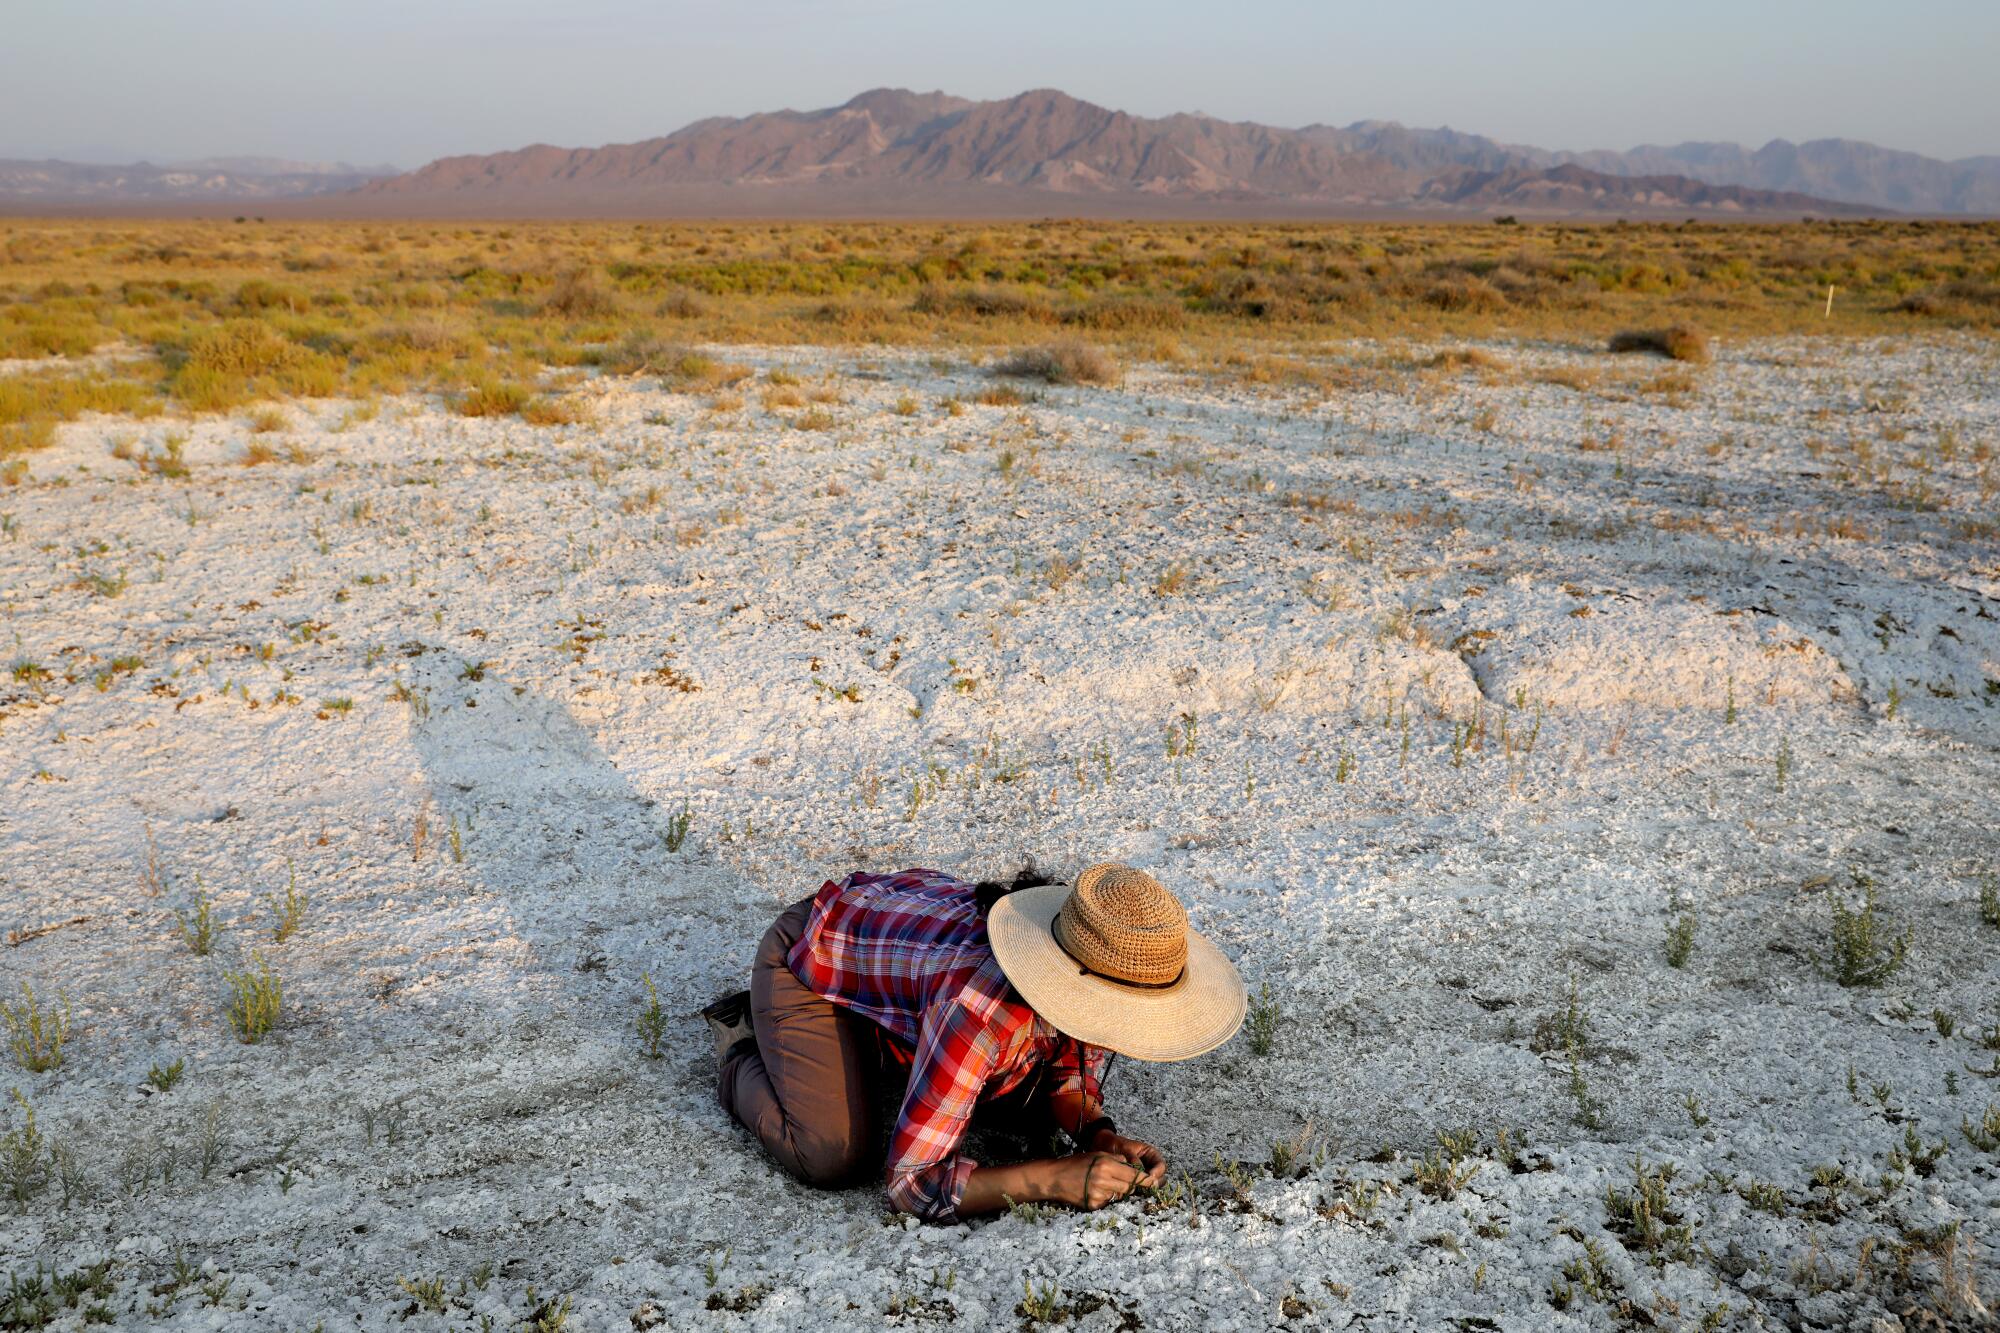 A woman in long sleeves and wide-brimmed hat kneels on a desert salt patch